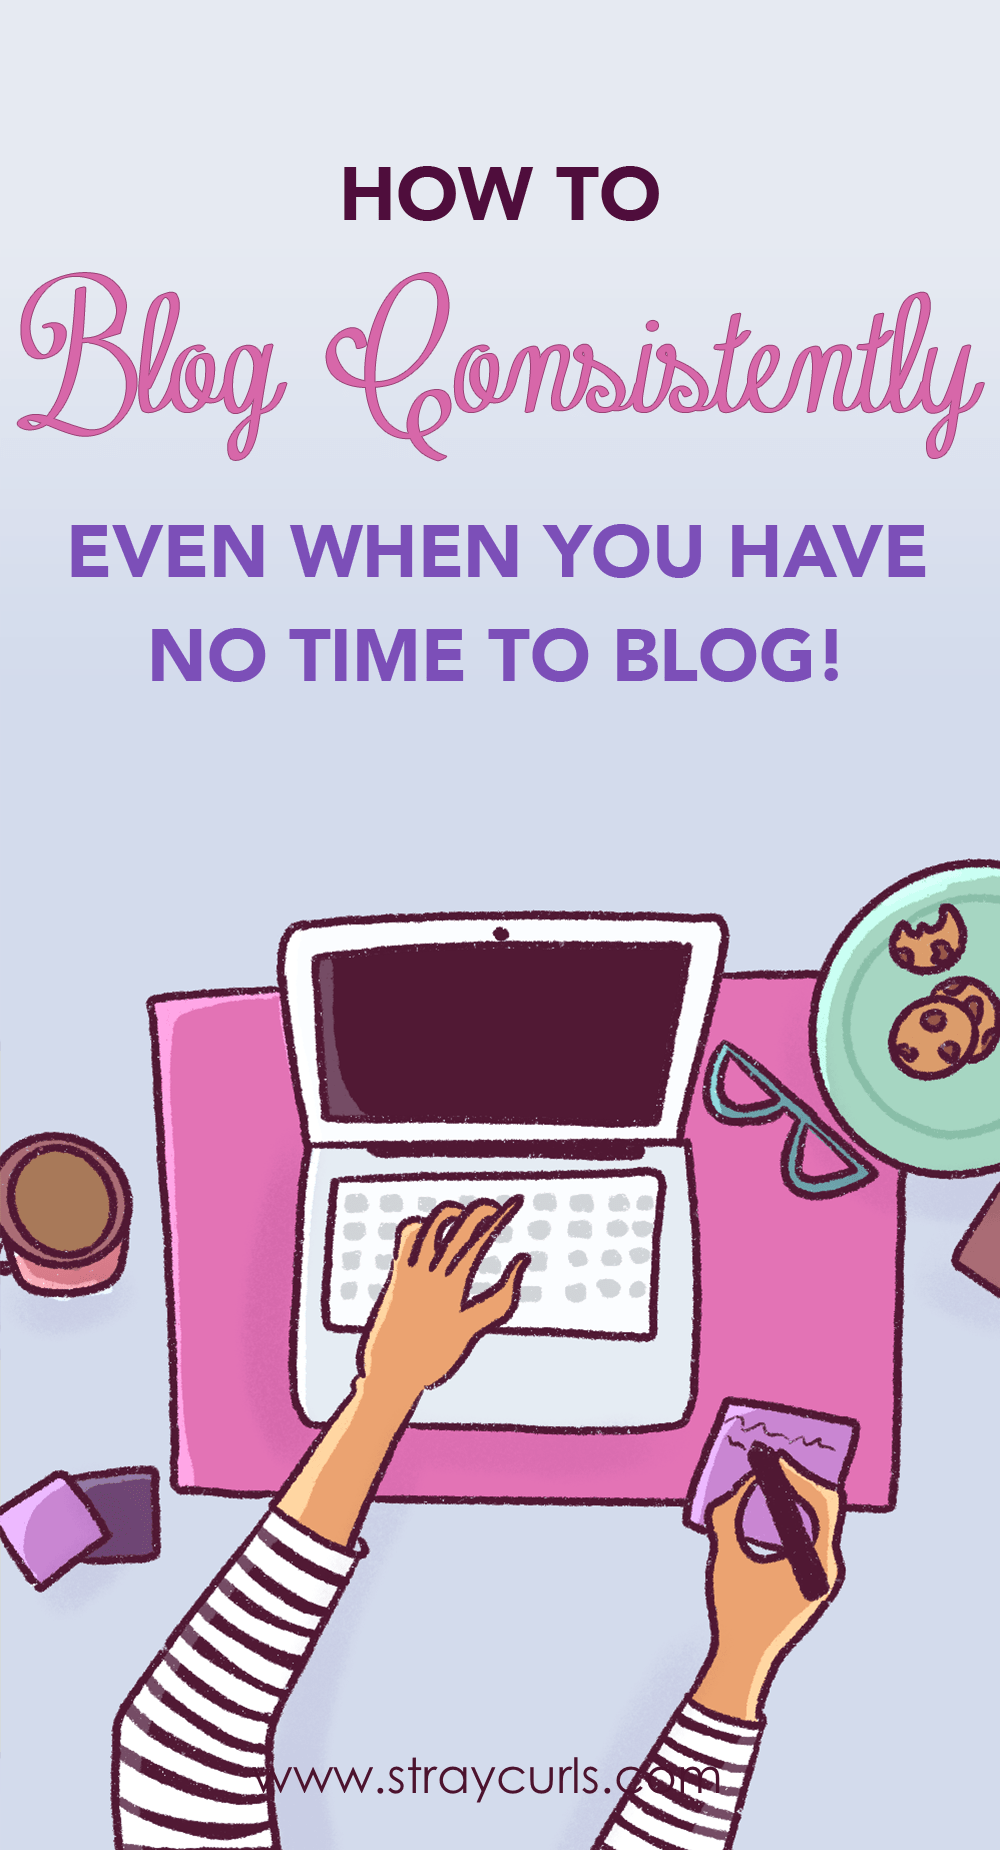 Learn how to blog consistently even when you don't have time to blog. Beat procrastination and become a consistent blogger with these amazing time hacks! #blogging #girlboss #blog #writing #writer girl typing on laptop